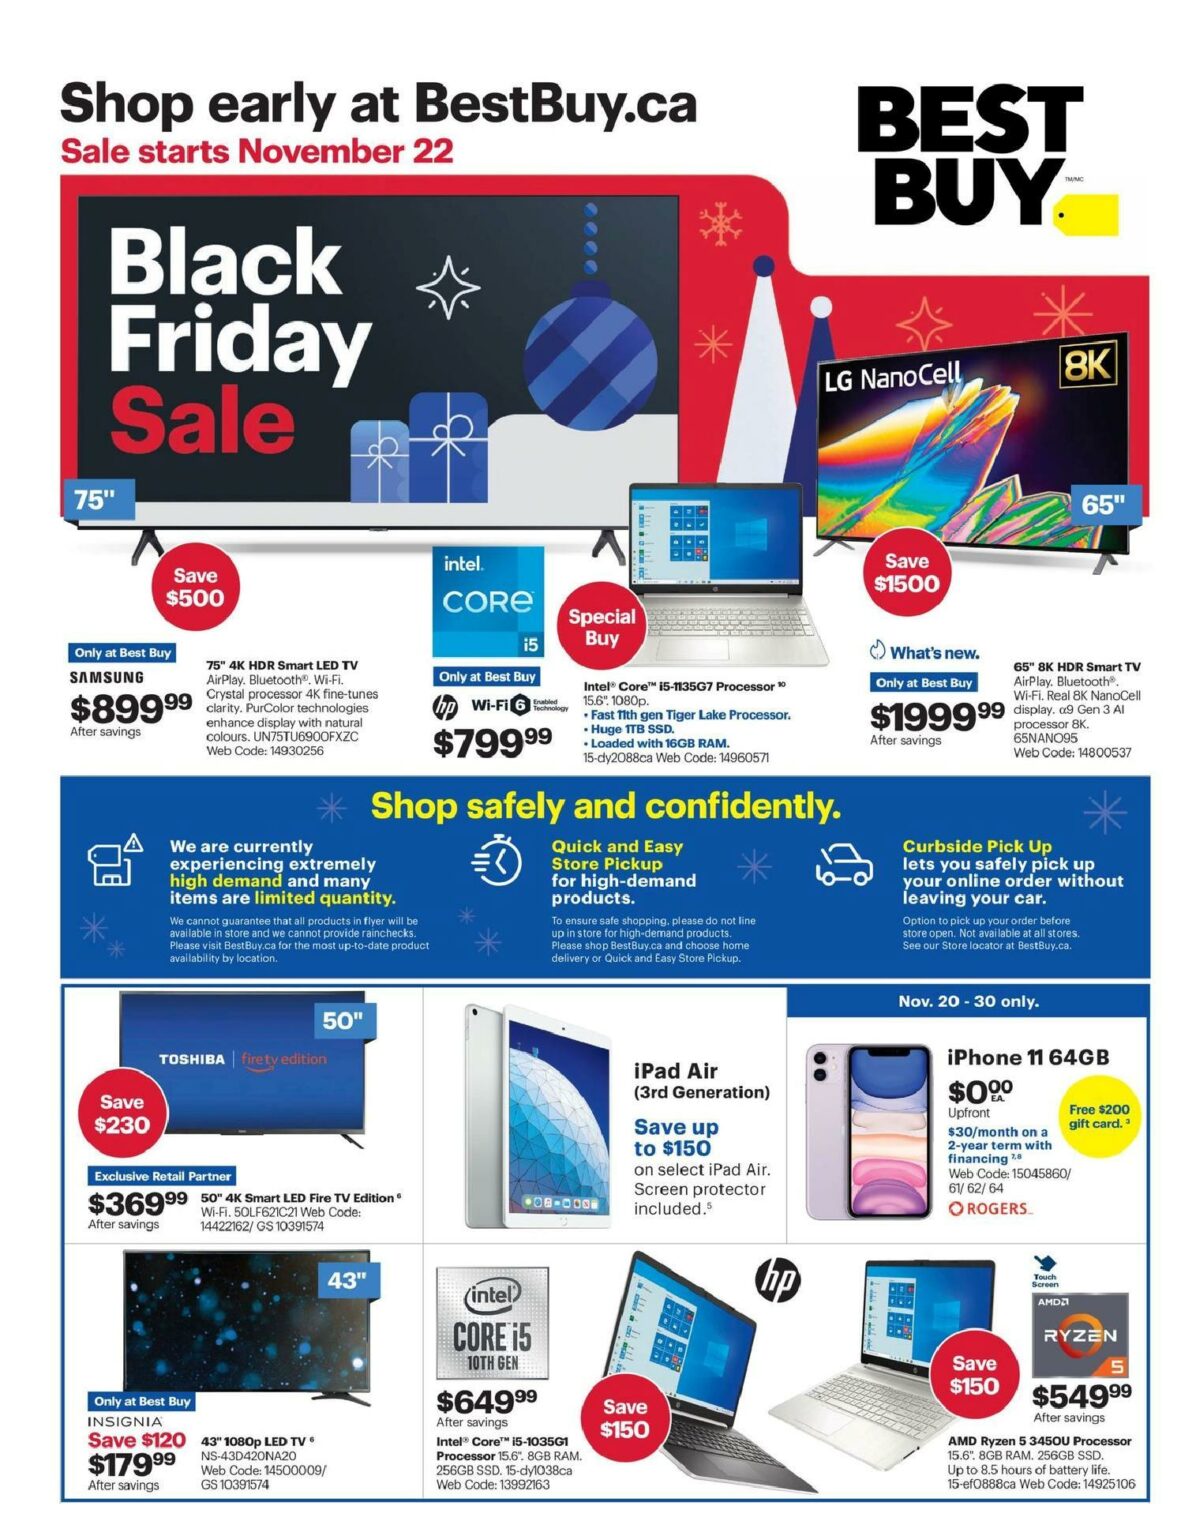 Best Buy Black Friday Flyer Deals 2020 Canada - What Are The Real Black Friday Deals